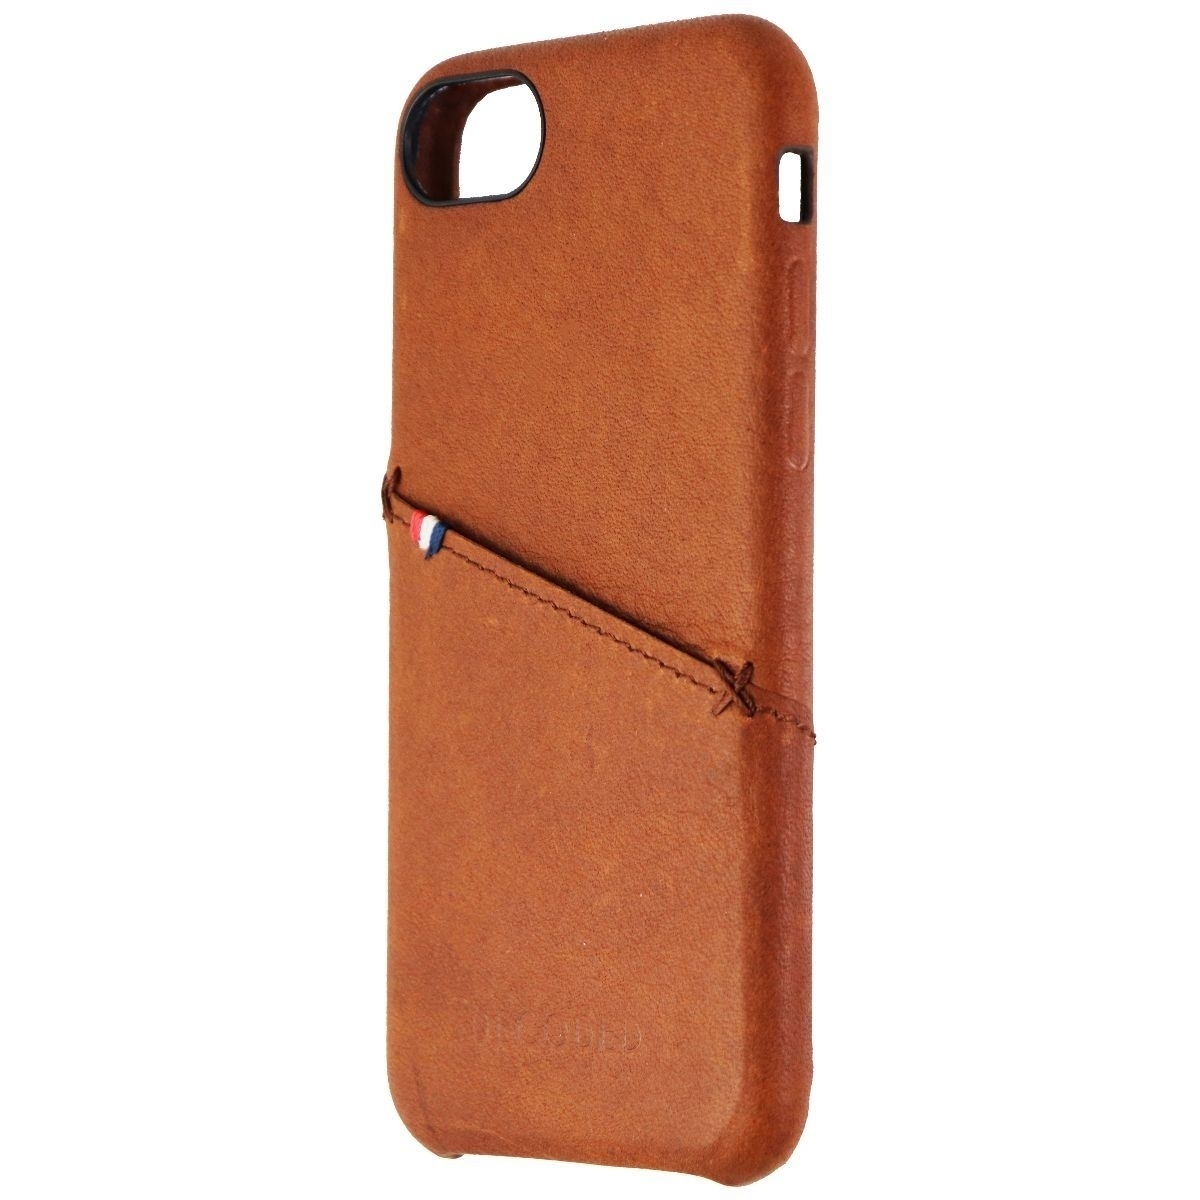 Decoded Leather Case For Apple SE (2nd Gen) / IPhone 8 / 7 / 6s / 6 - Cinnamon (Refurbished)